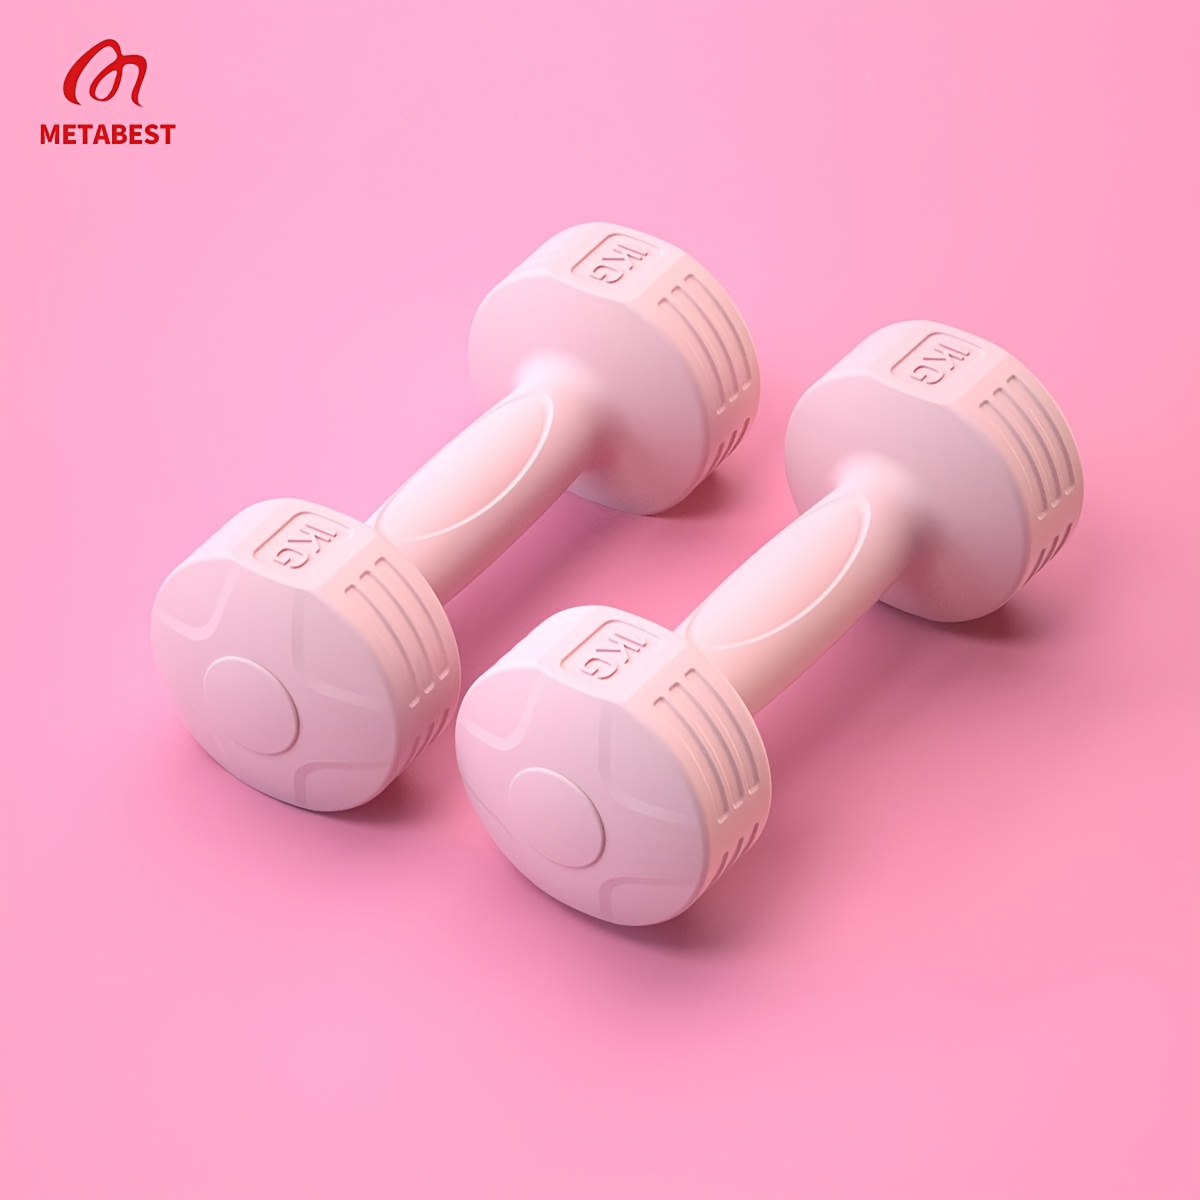 Sport, Working Out and Bodybuilding Concept with Girly Workout Equipment  Like a Pink Pair of Gym Gloves, Two Dumbbells or Weights Stock Photo -  Image of training, bottle: 139931768